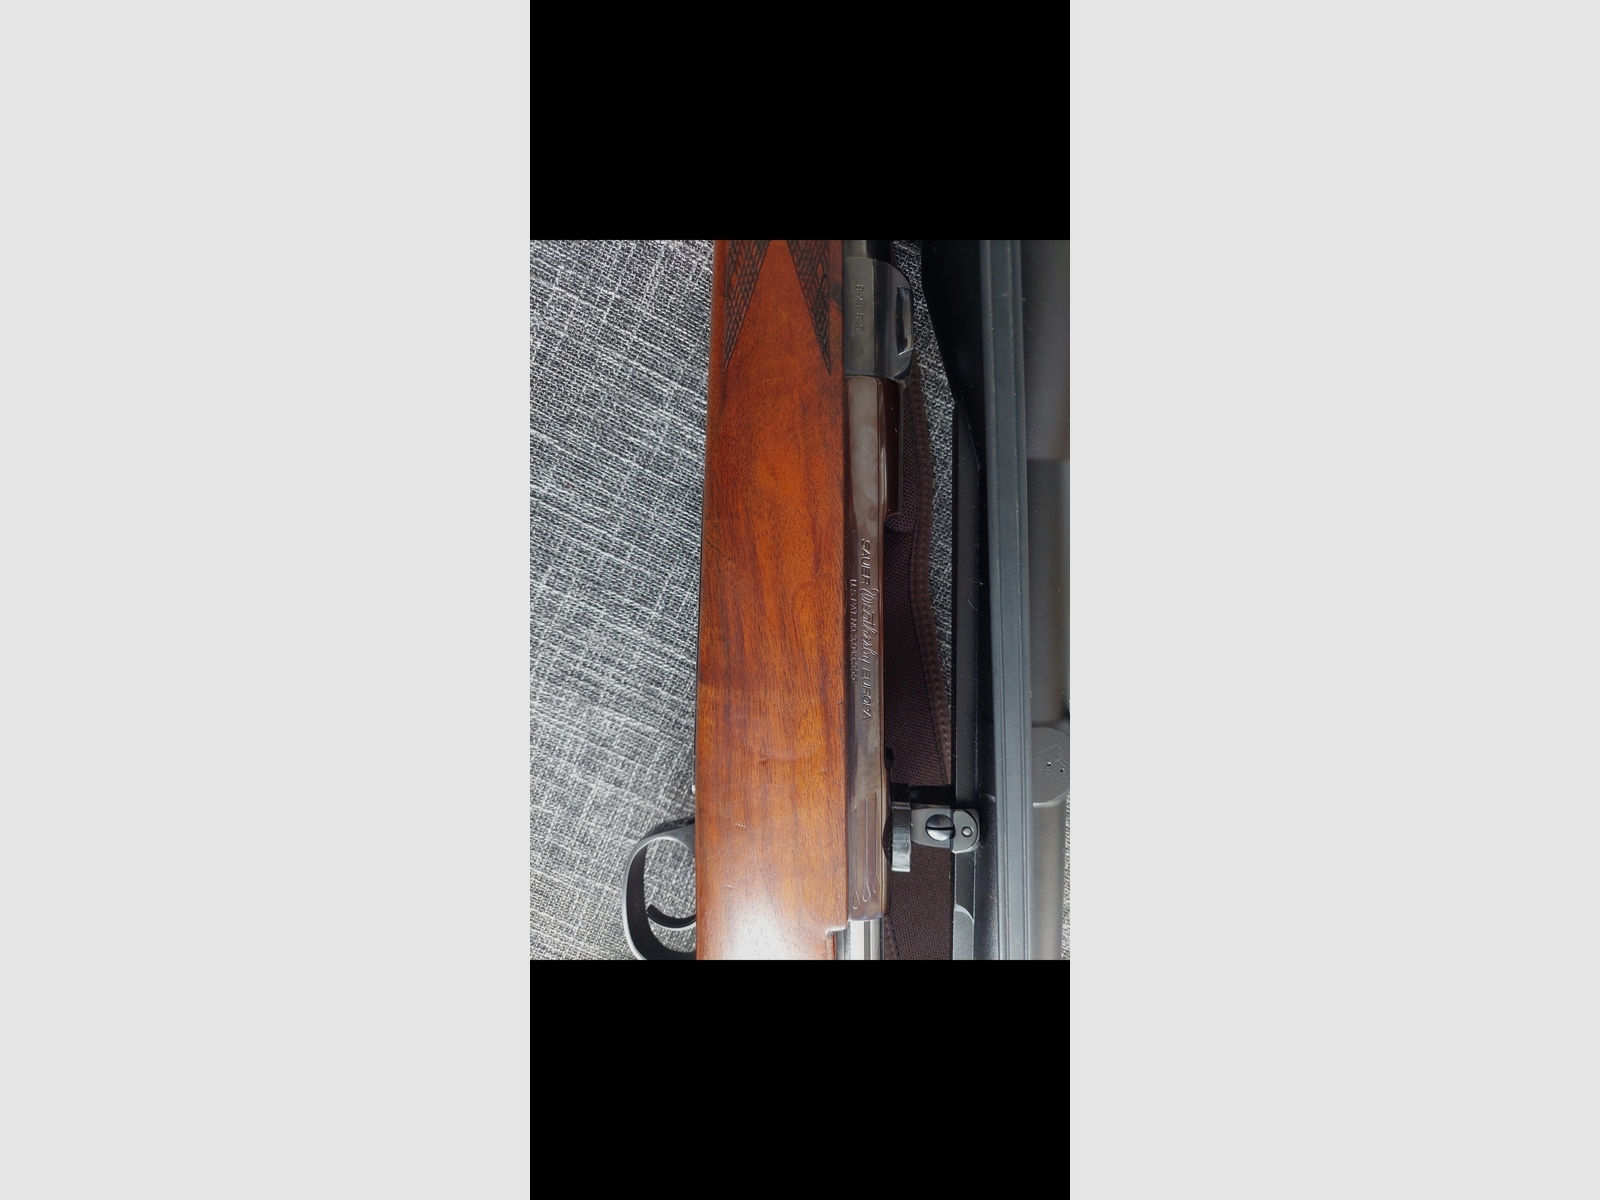 Sauer Weaterby Europa 8x68s 